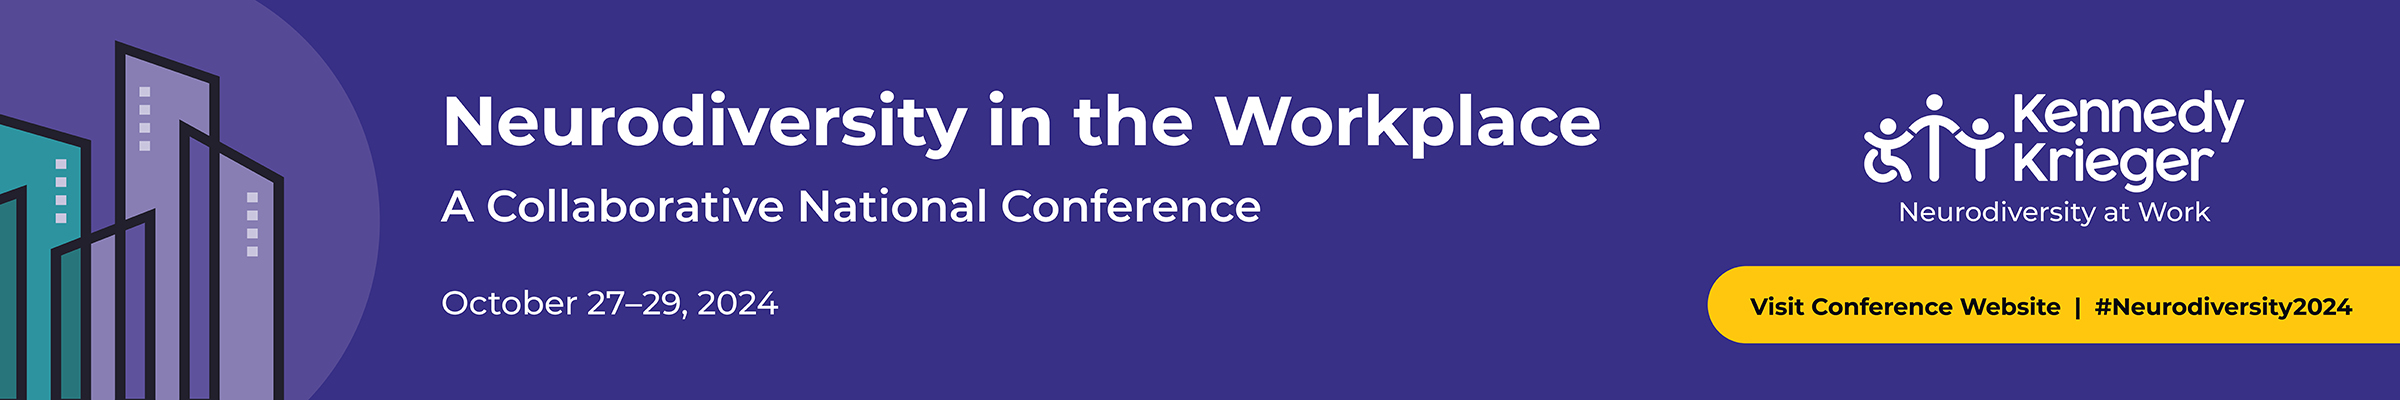 Neurodiversity in the Workplace National Conference 2024